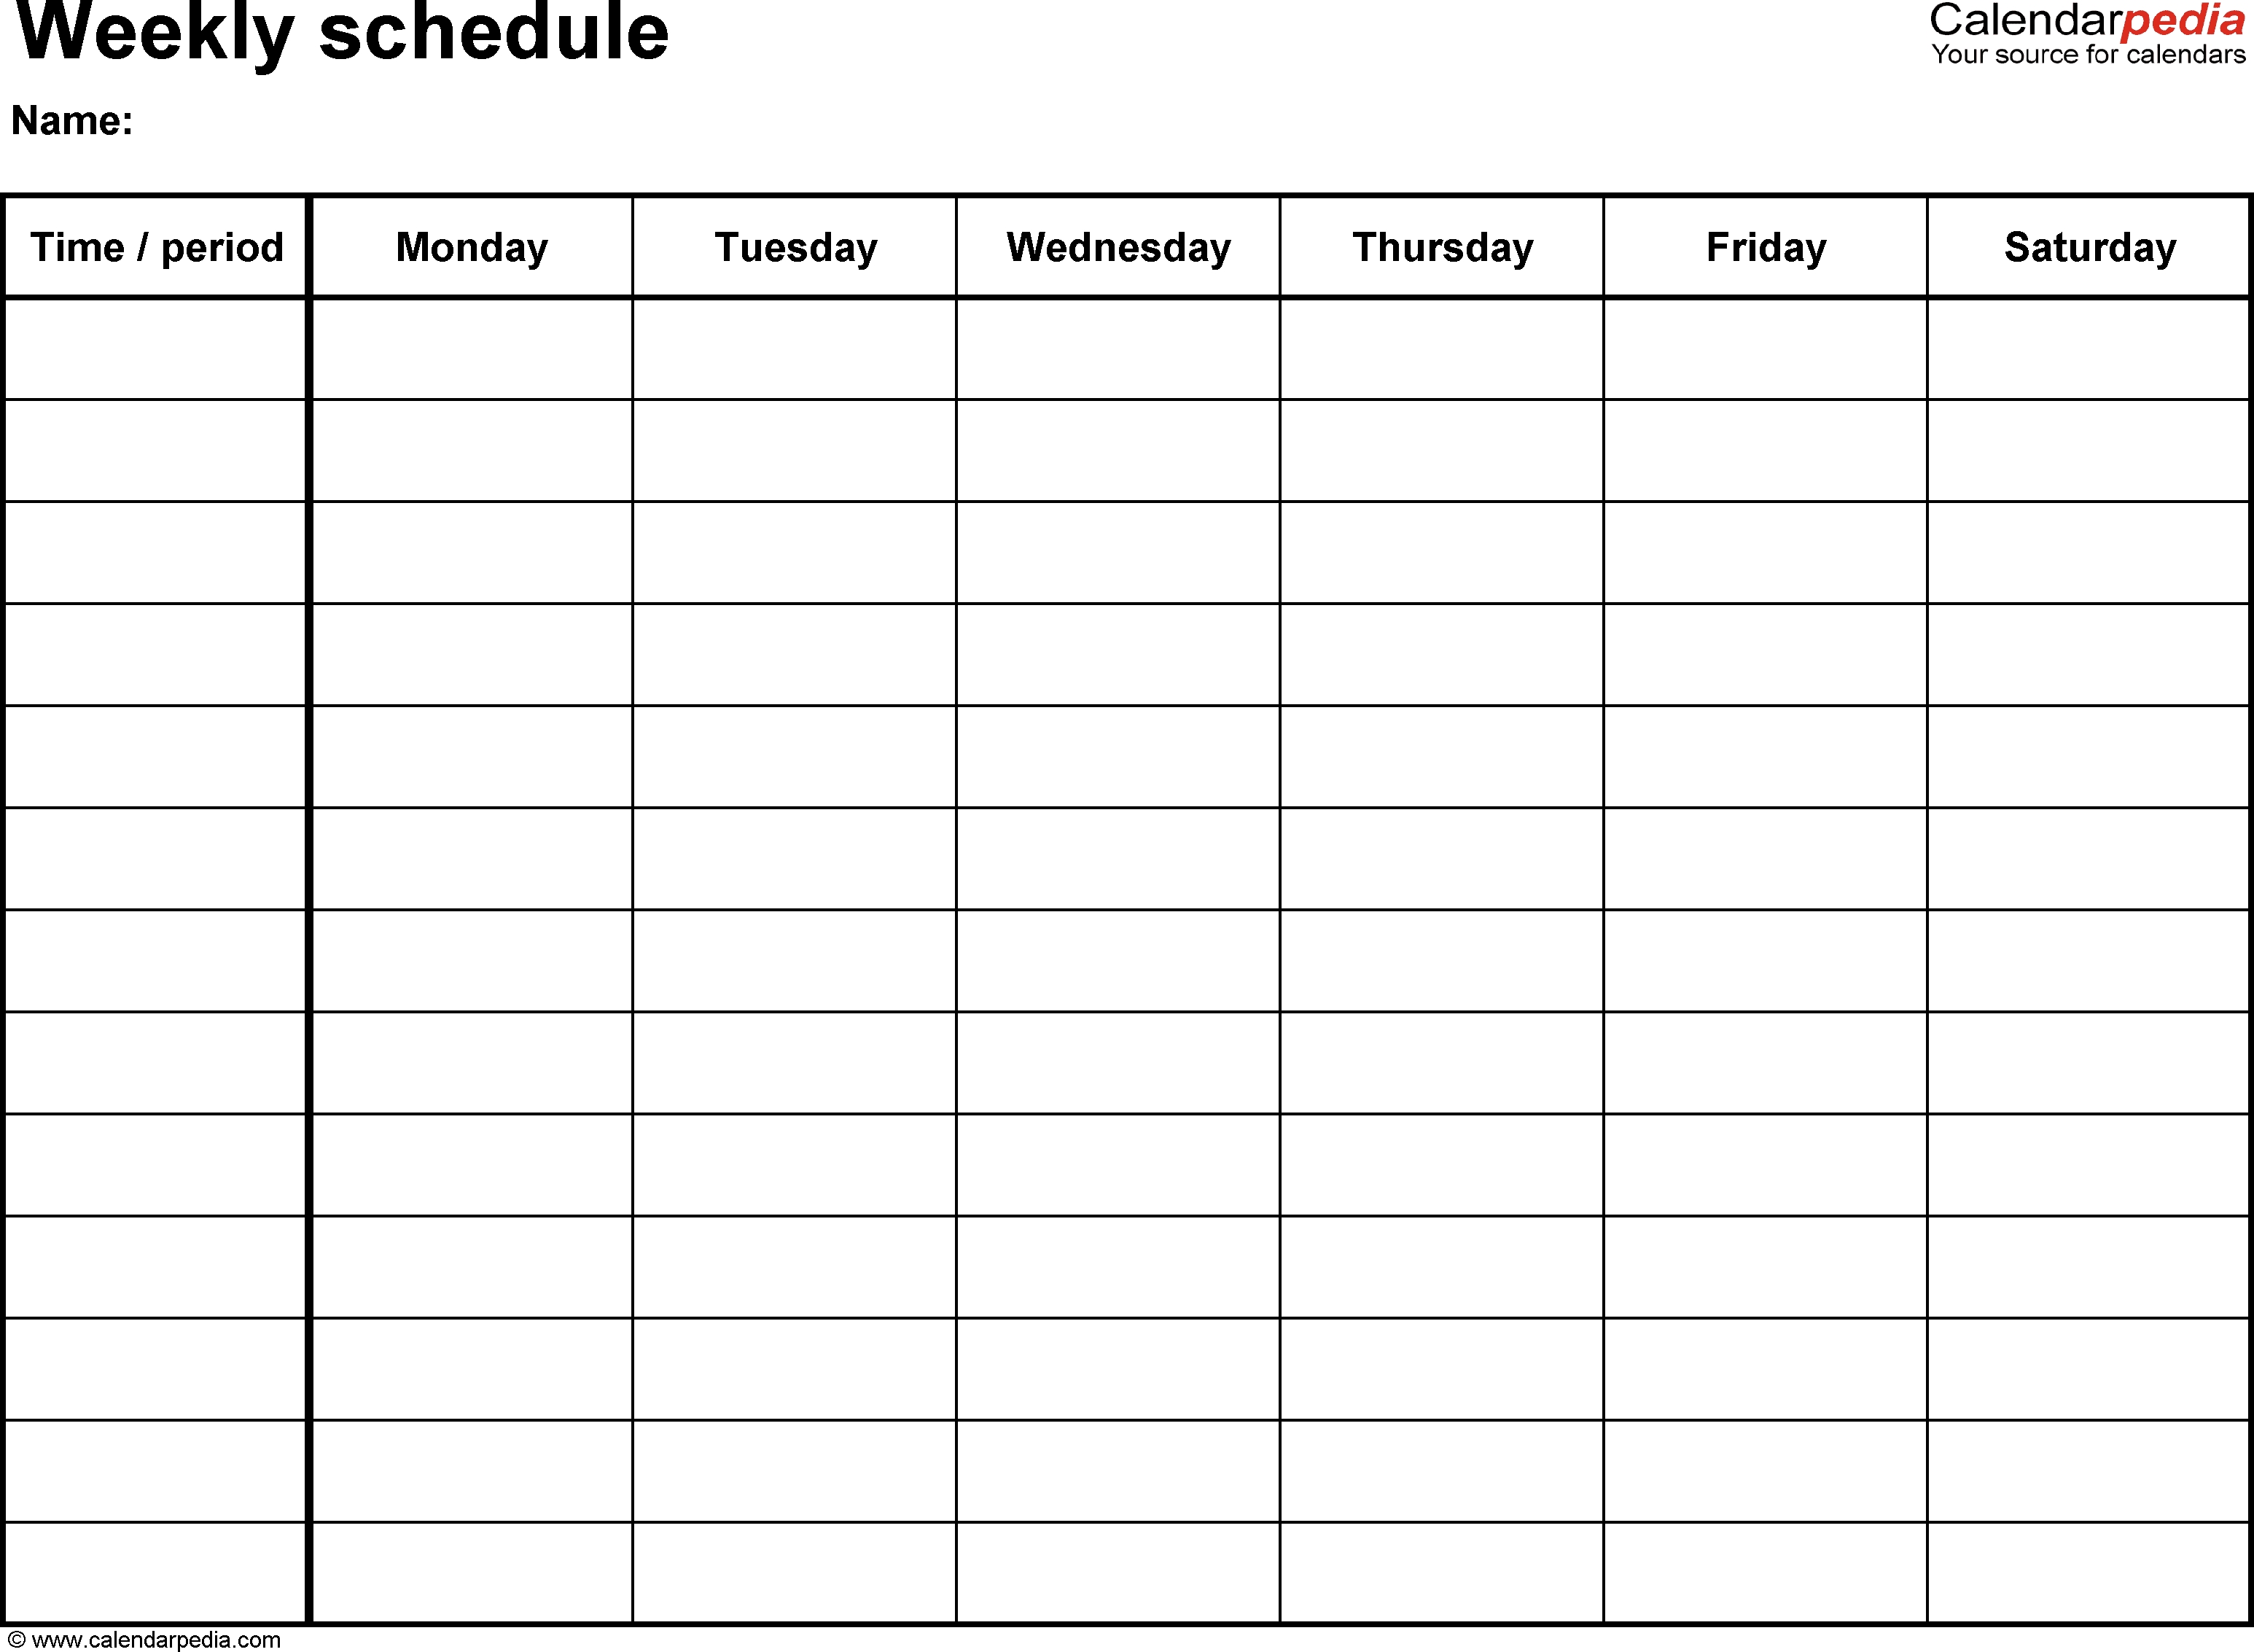 Free Weekly Schedule Templates For Word - 18 Templates  Monday Through Friday Schedule Template Free